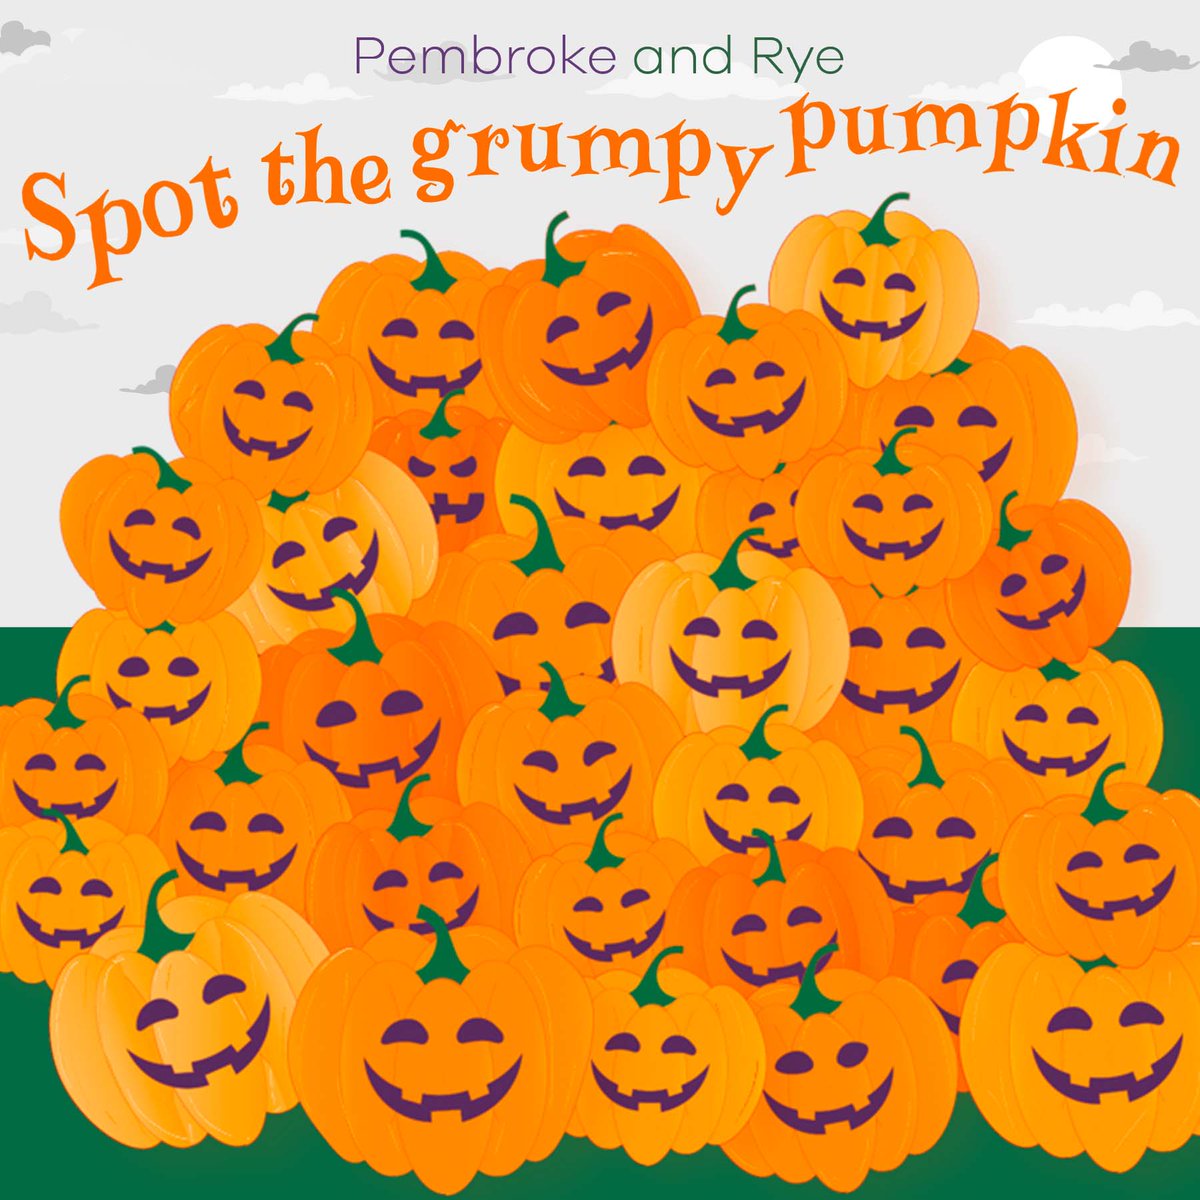 Happy Halloween! 🎃 We love spooky season at Pembroke and Rye and we have been carving our pumpkins ready for Sunday. The only thing is, we’ve lost our grumpy pumpkin, can you help us find it? 🕵️‍♀️ Let us know in the comments when you’ve spotted it. Good luck! 👻 #Halloween2021